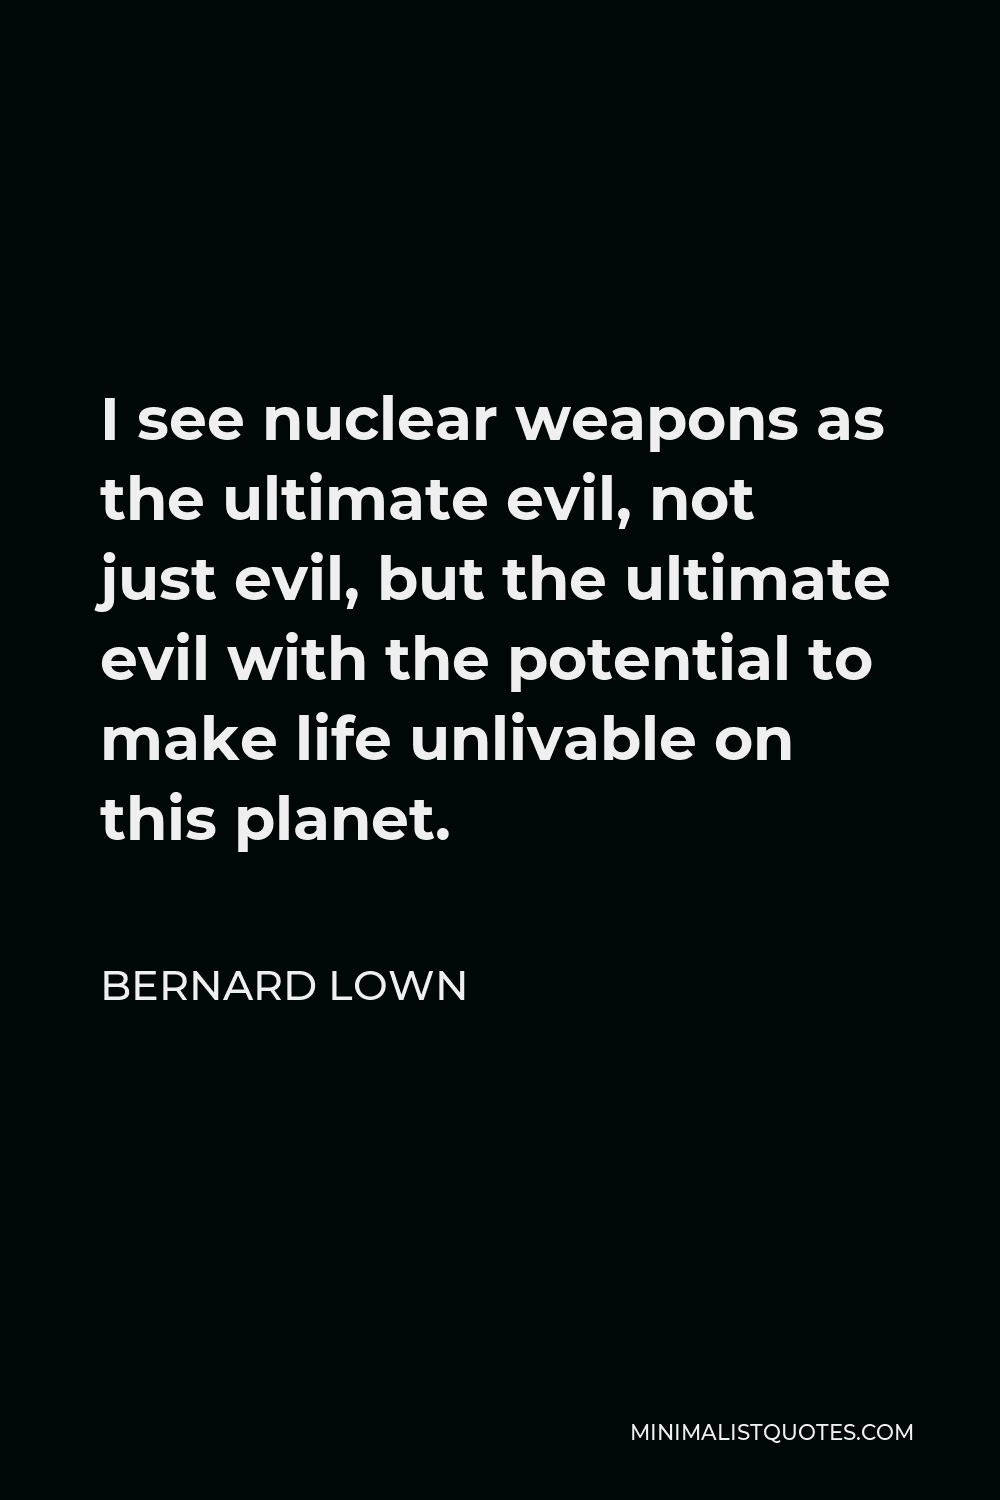 Bernard Lown Quote - I see nuclear weapons as the ultimate evil, not just evil, but the ultimate evil with the potential to make life unlivable on this planet.